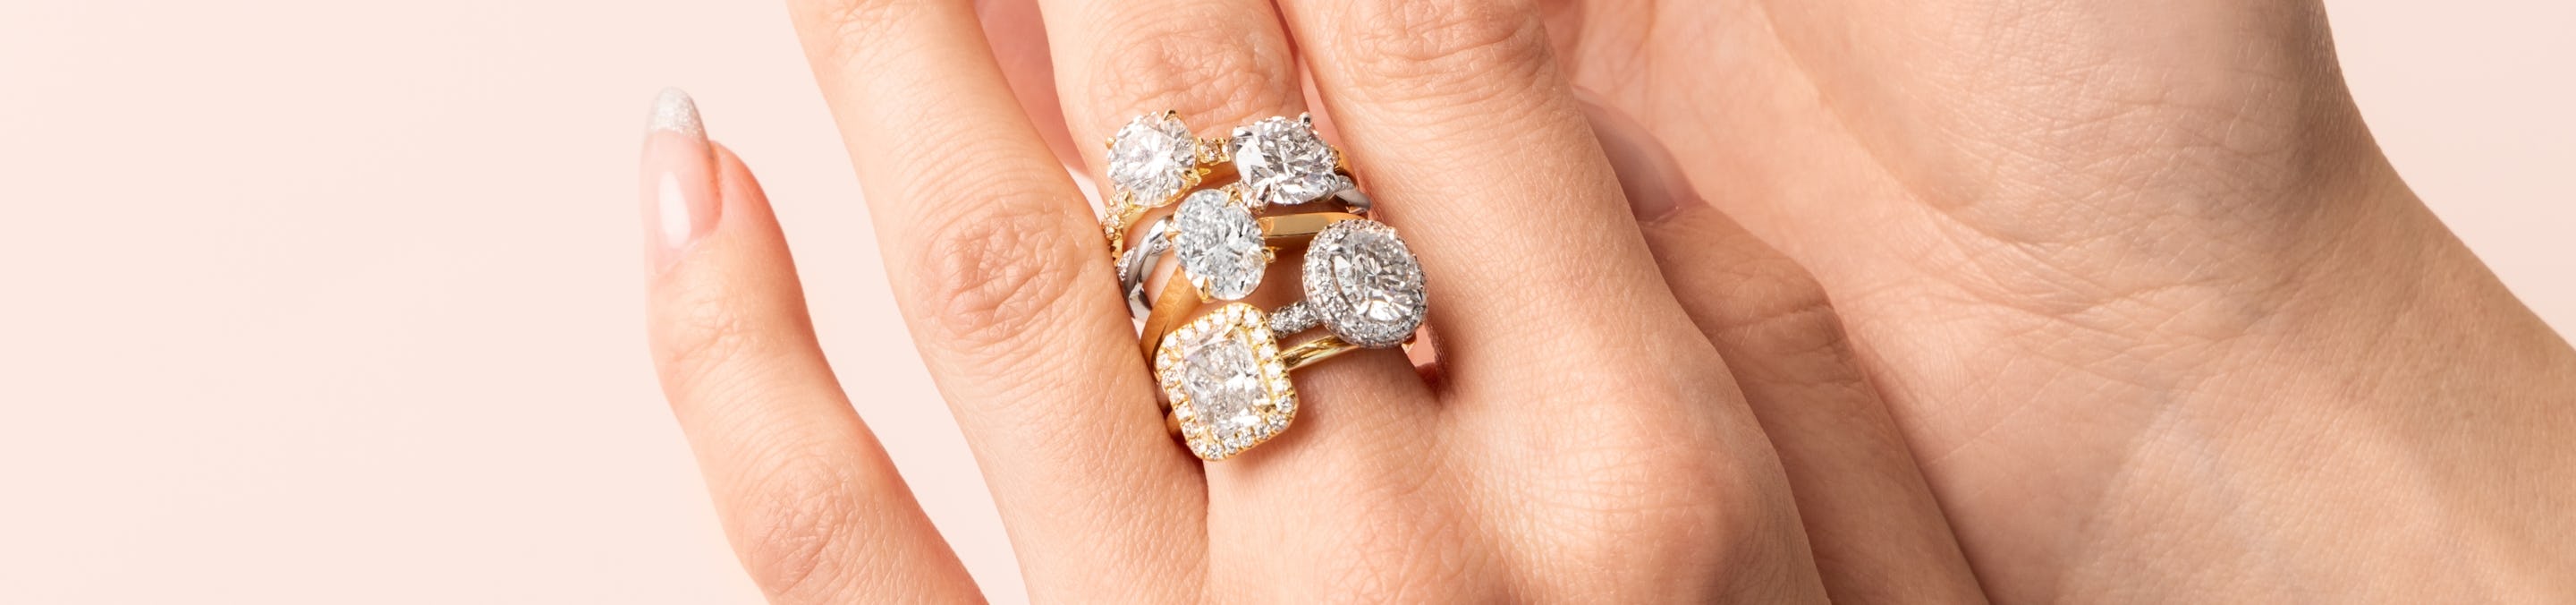 hand showcasing five engagement styles including solitaire, halo, pave and more